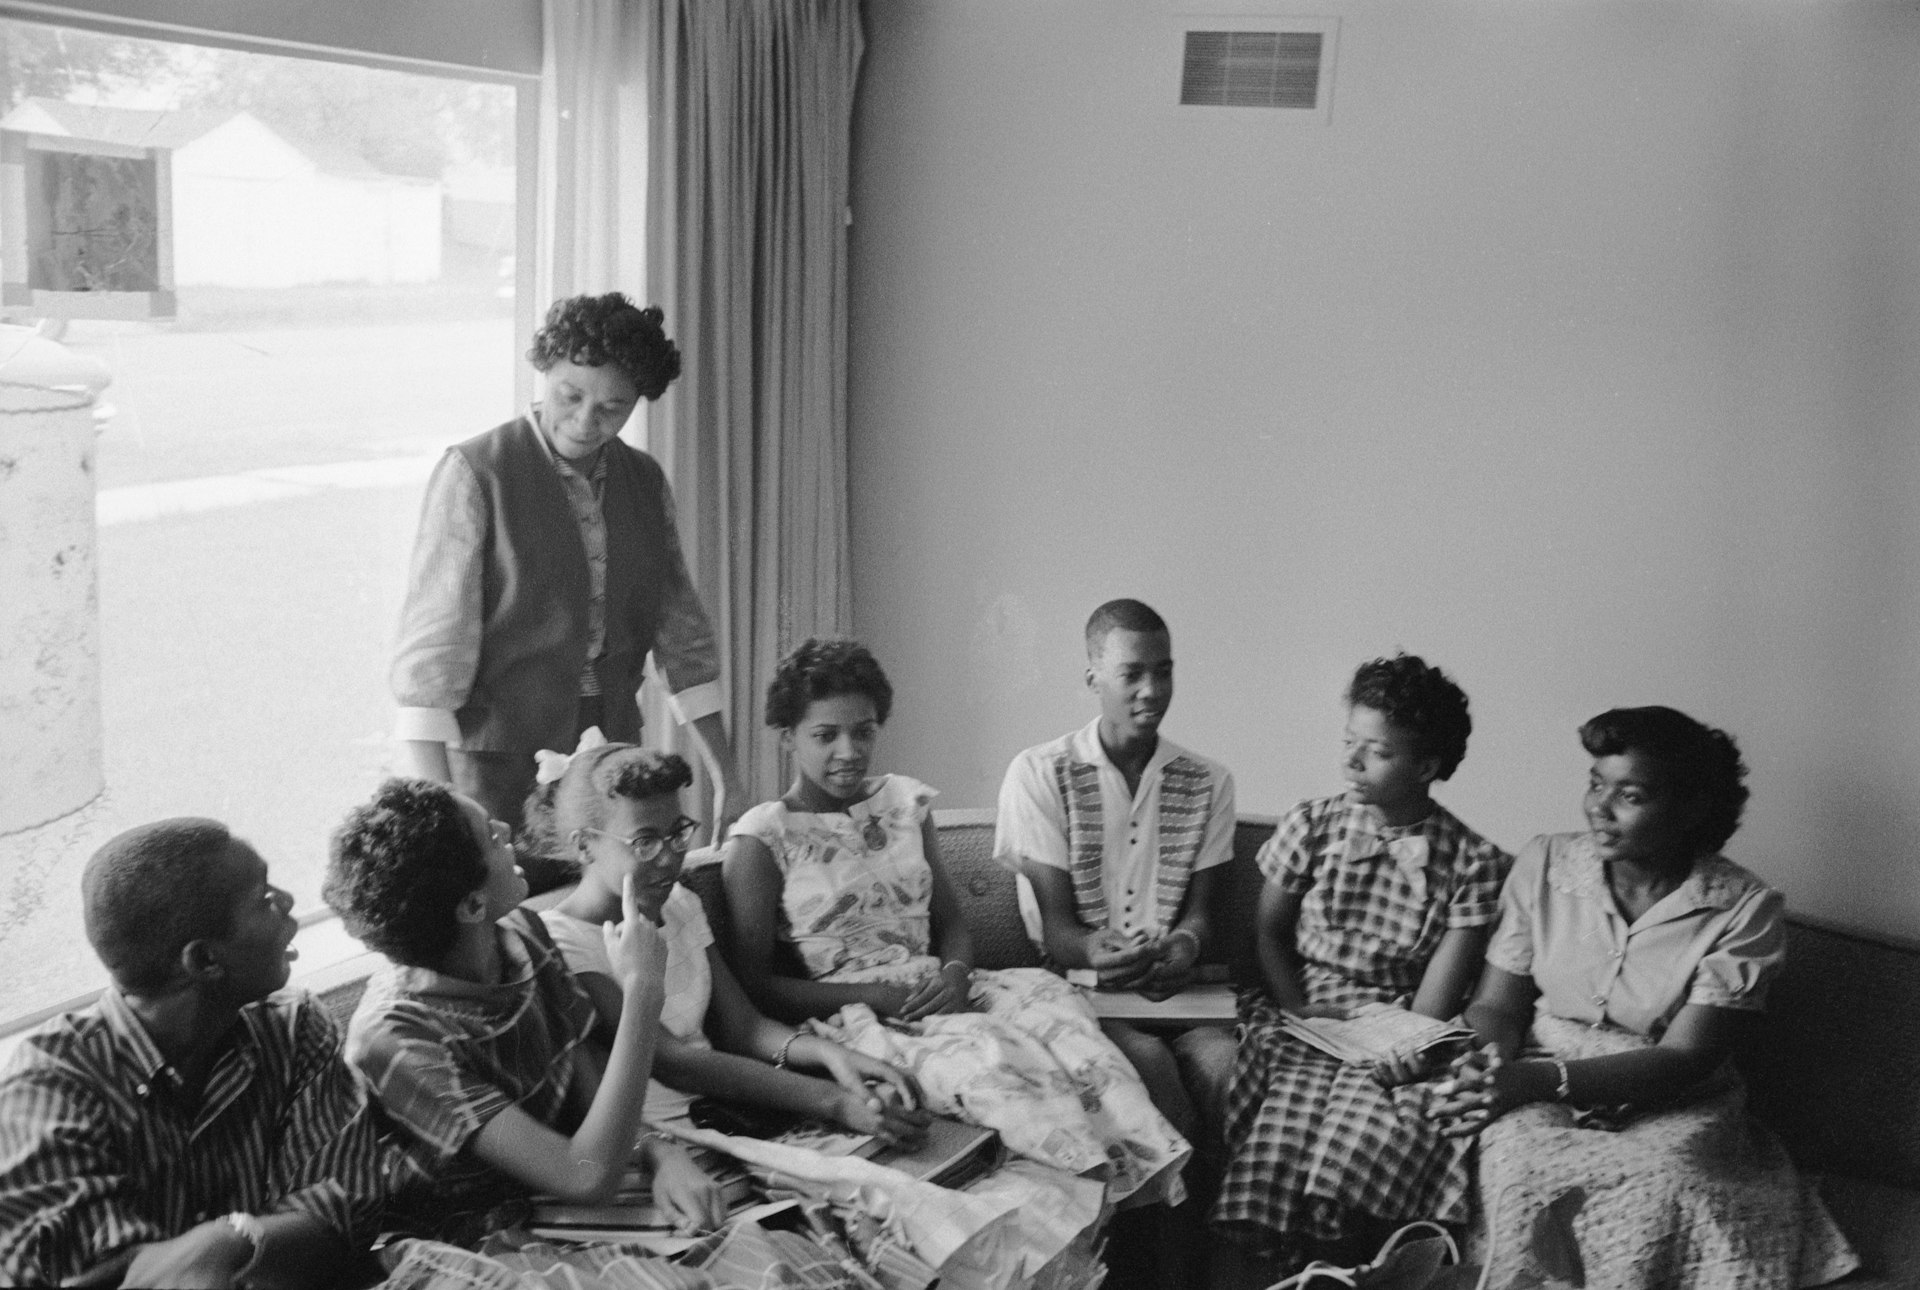 American Civil Rights leader & journalist Daisy Bates (standing) talks with some of the Little Rock Nine at her home in Little Rock, Arkansas October 1957.